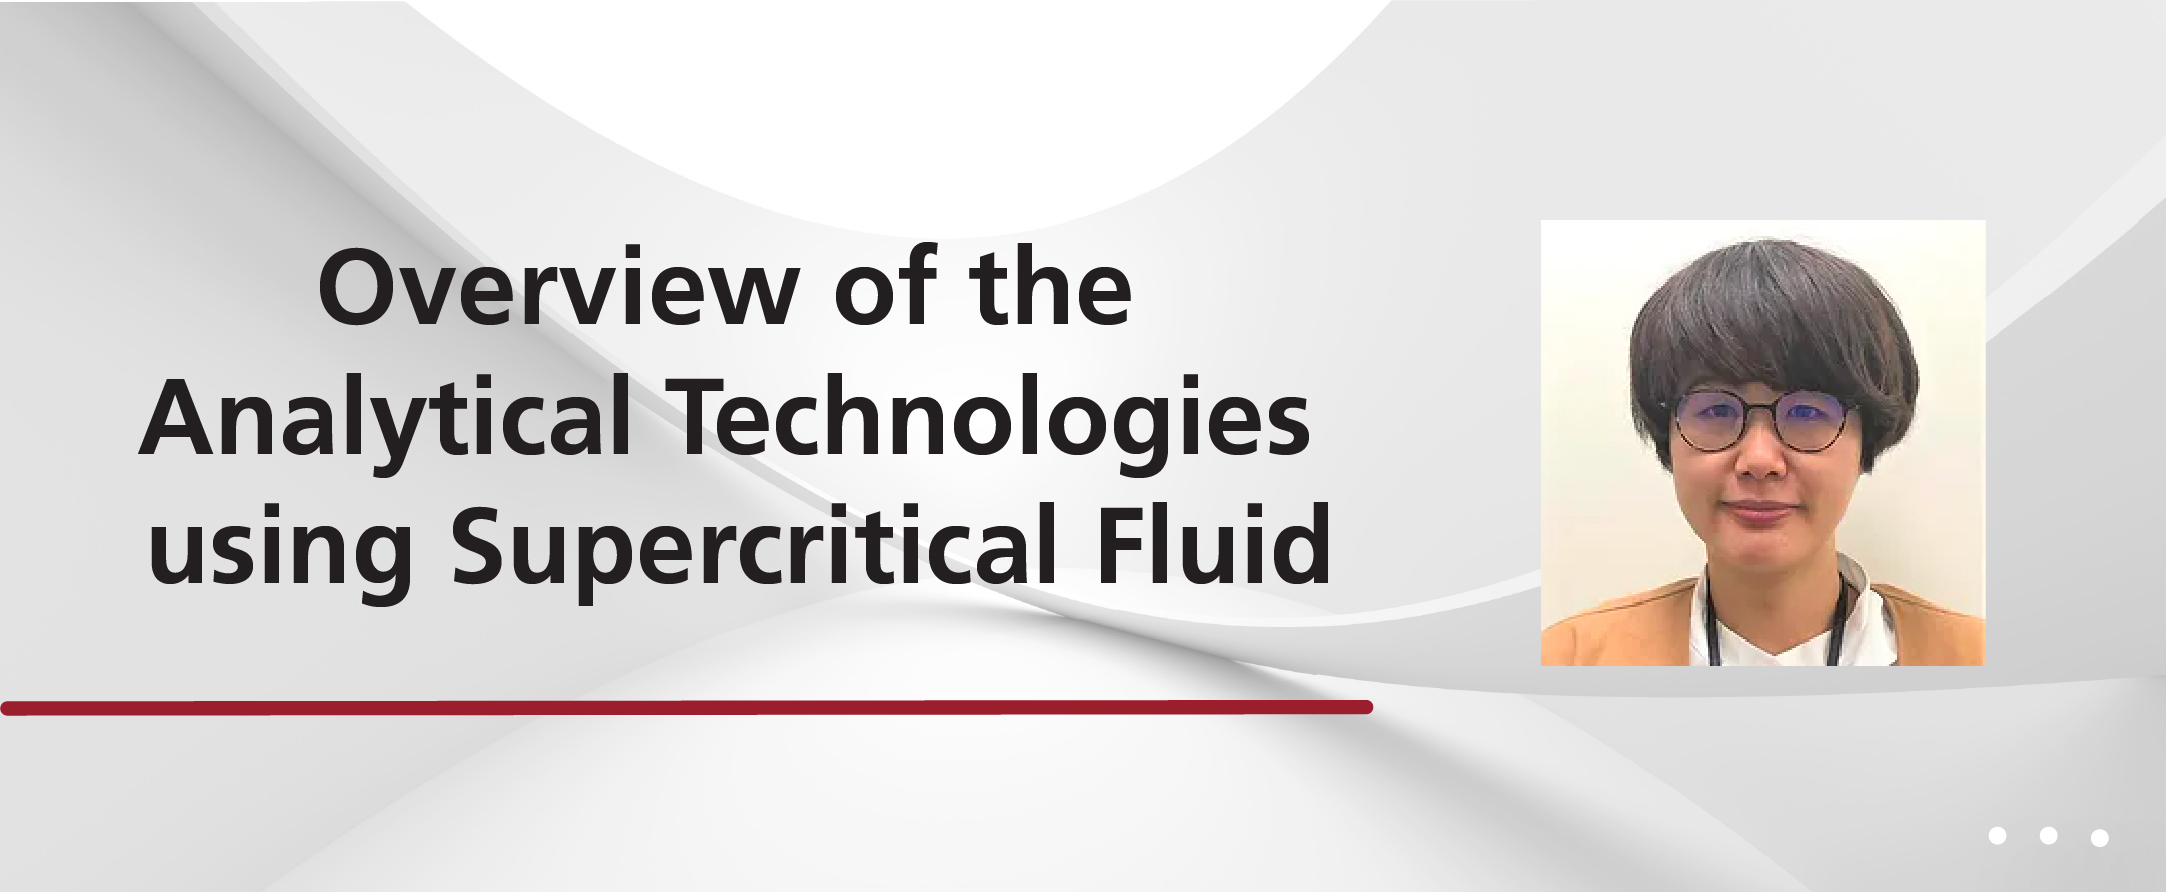 Overview of the Analytical Technologies using Supercritical Fluid